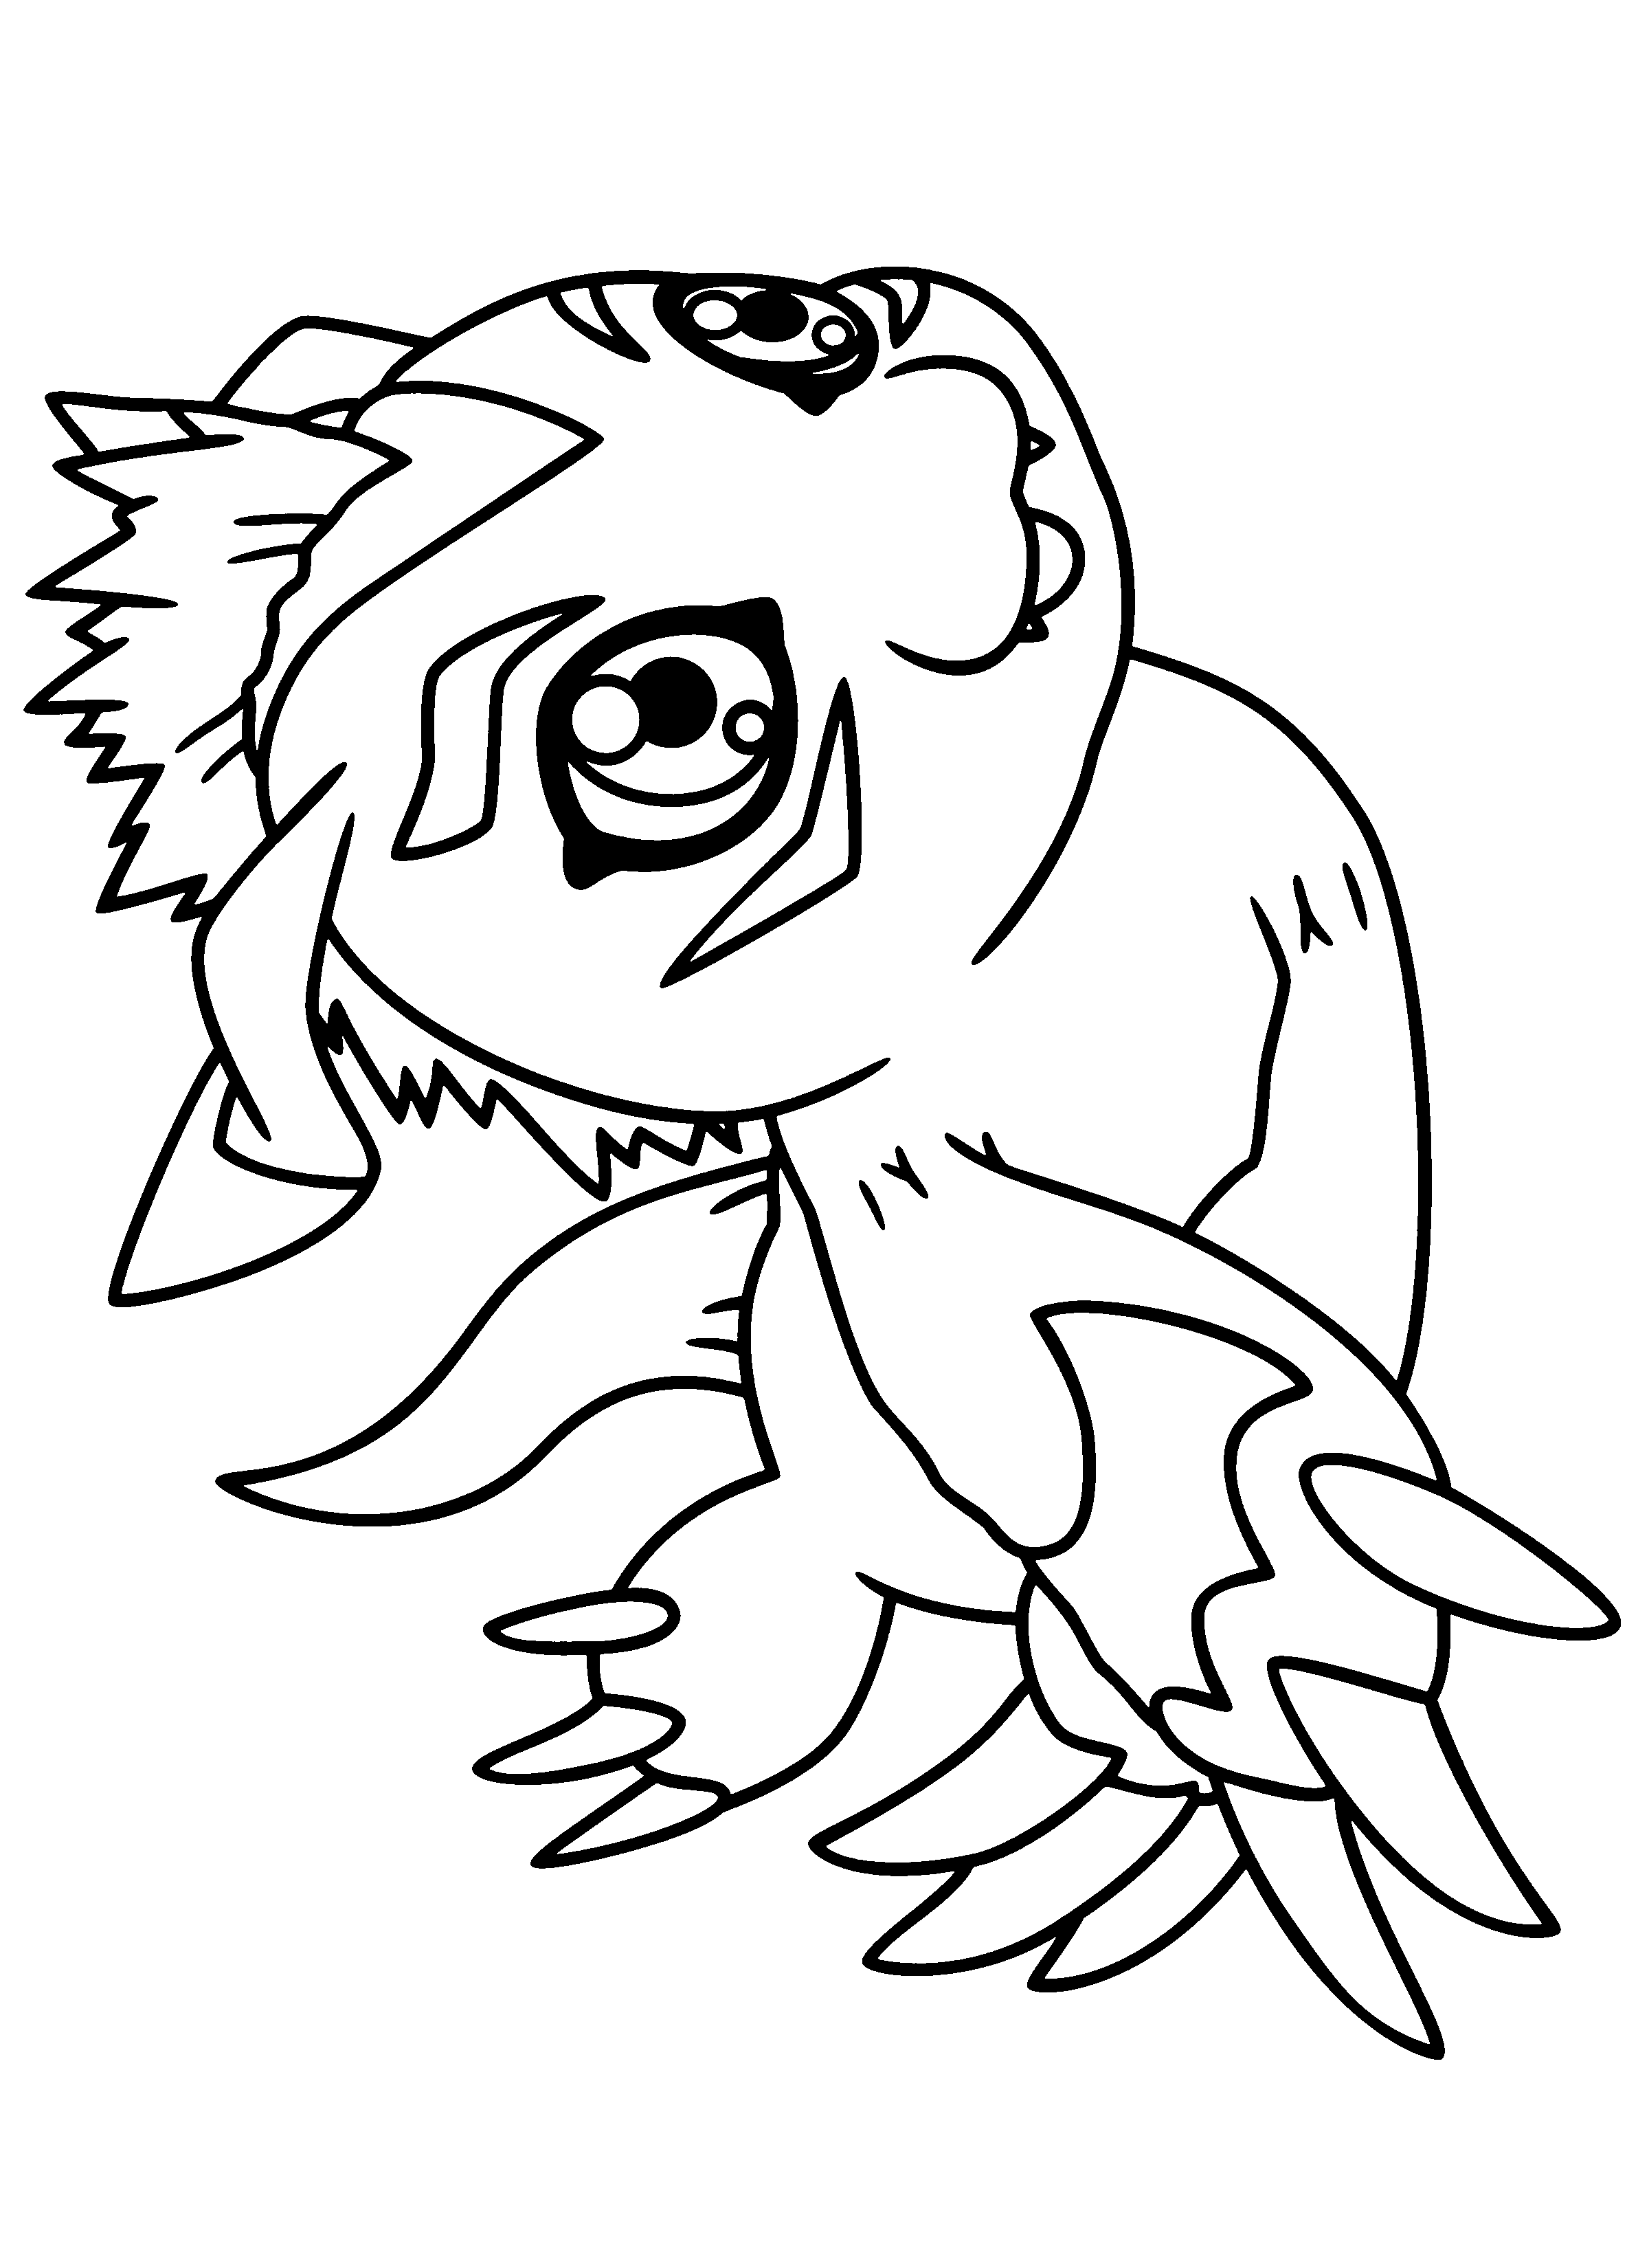 Coloring Page Digimon Coloring Pages 194